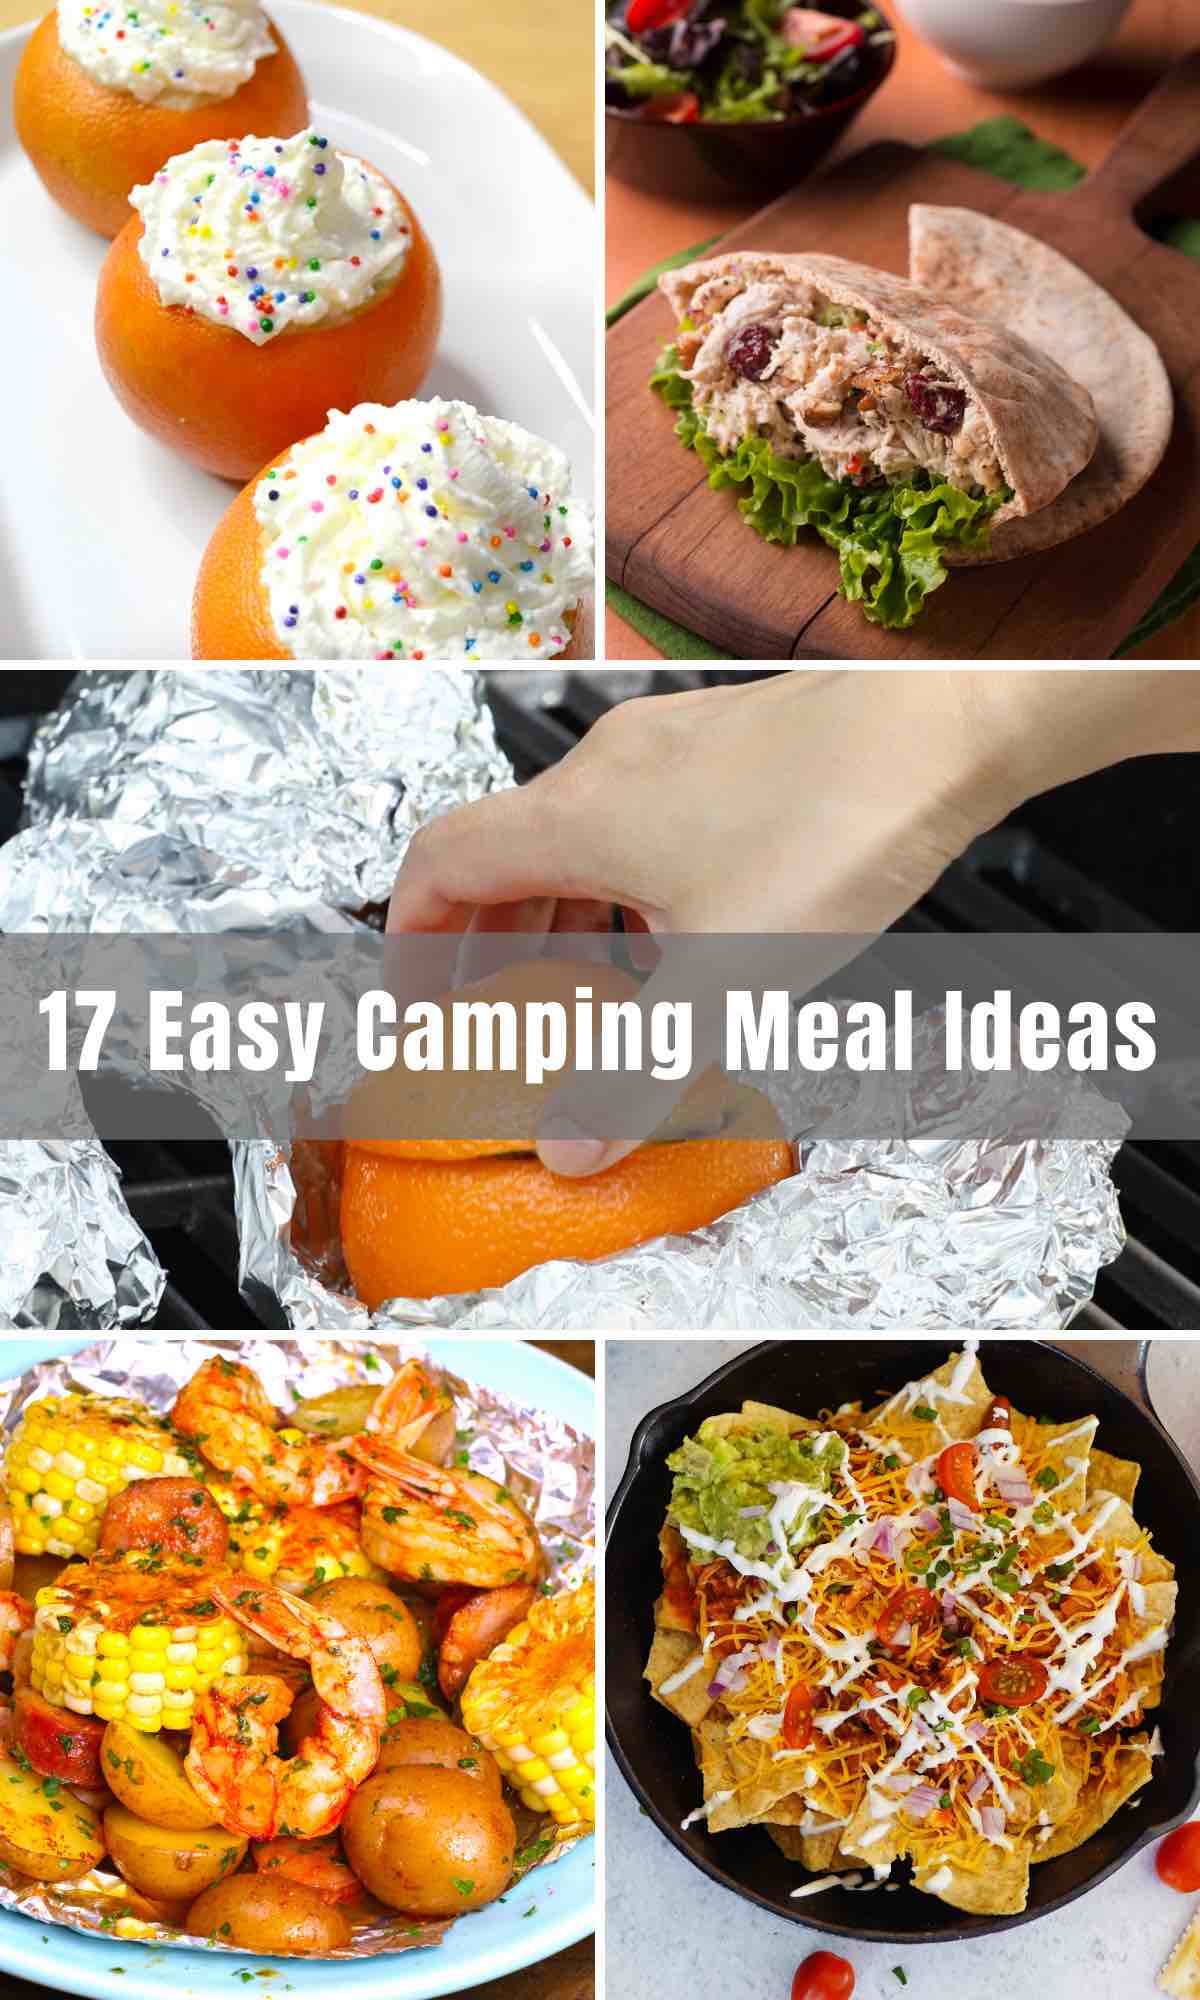 How to Reheat Food While Camping: Tips and Tricks.